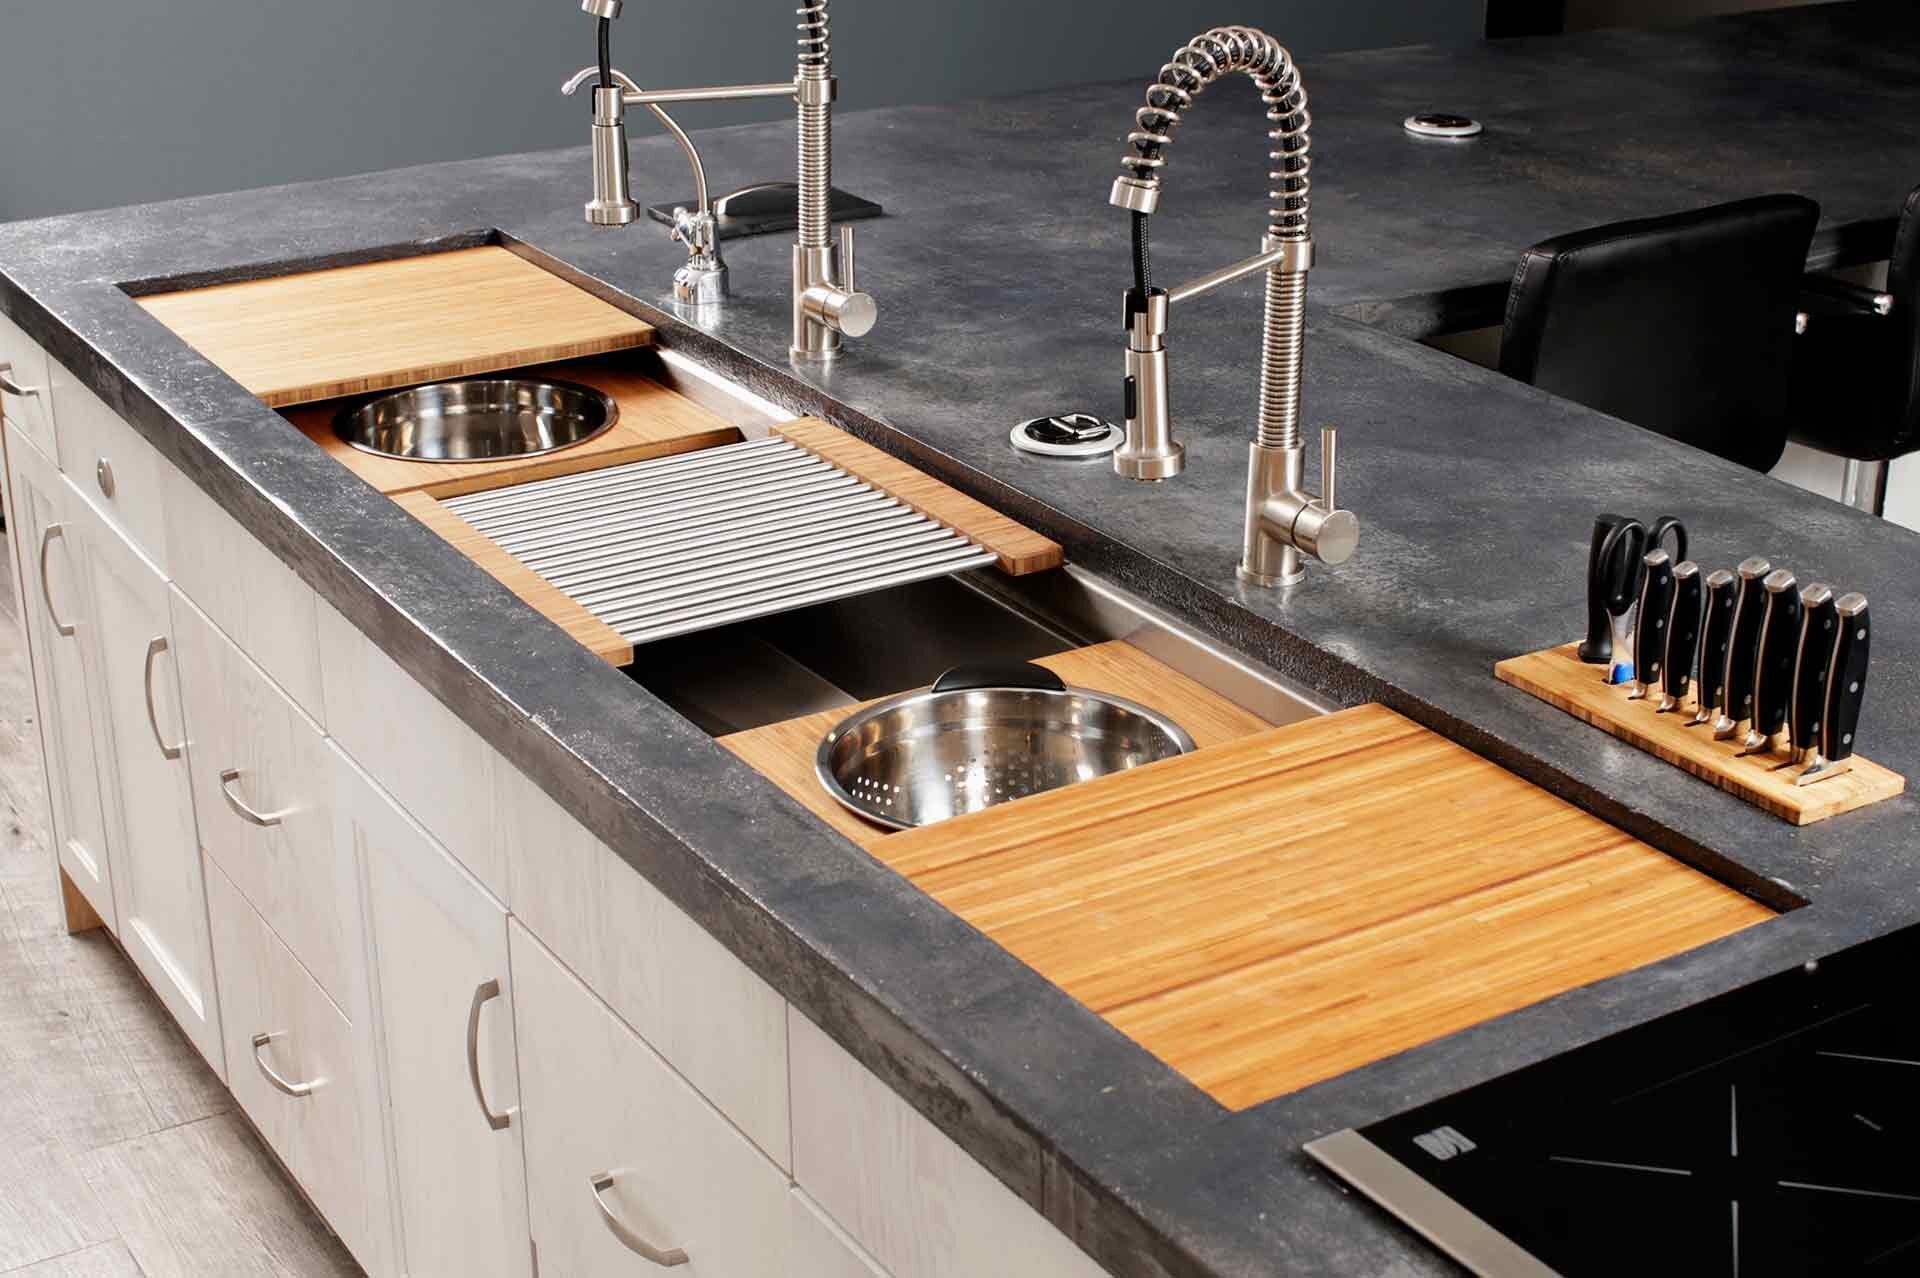 Plumbing Updates for Your Kitchen